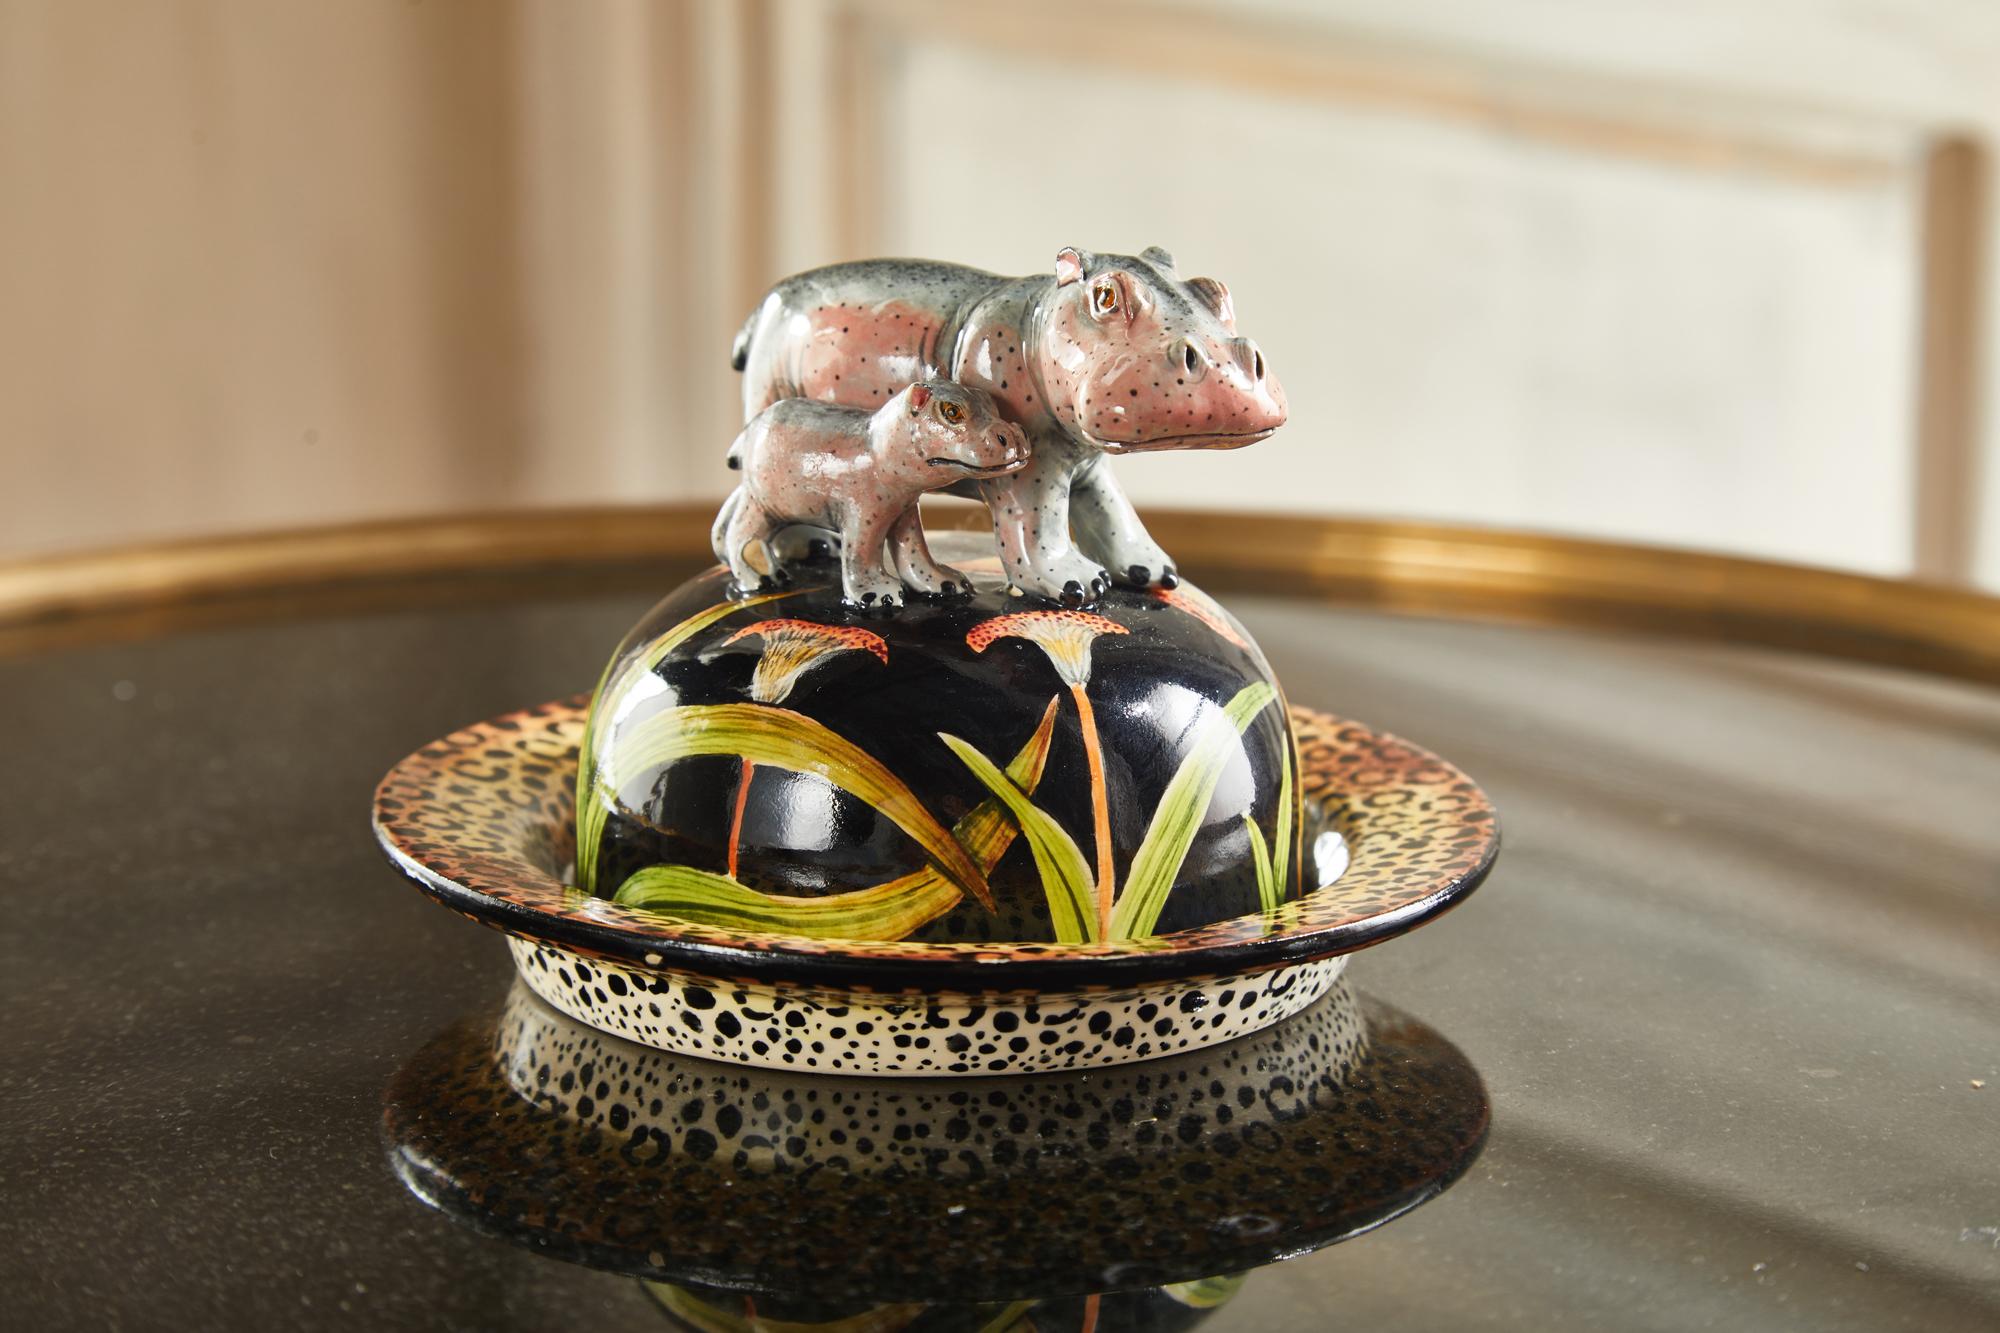 This artwork brings to life the land mammals, capturing the sorrowful reality in their expression.

This fancy butter dish is a true gem, with its decorative plate displaying a dark background, beautiful blossom, and Cheetah lookalike skin